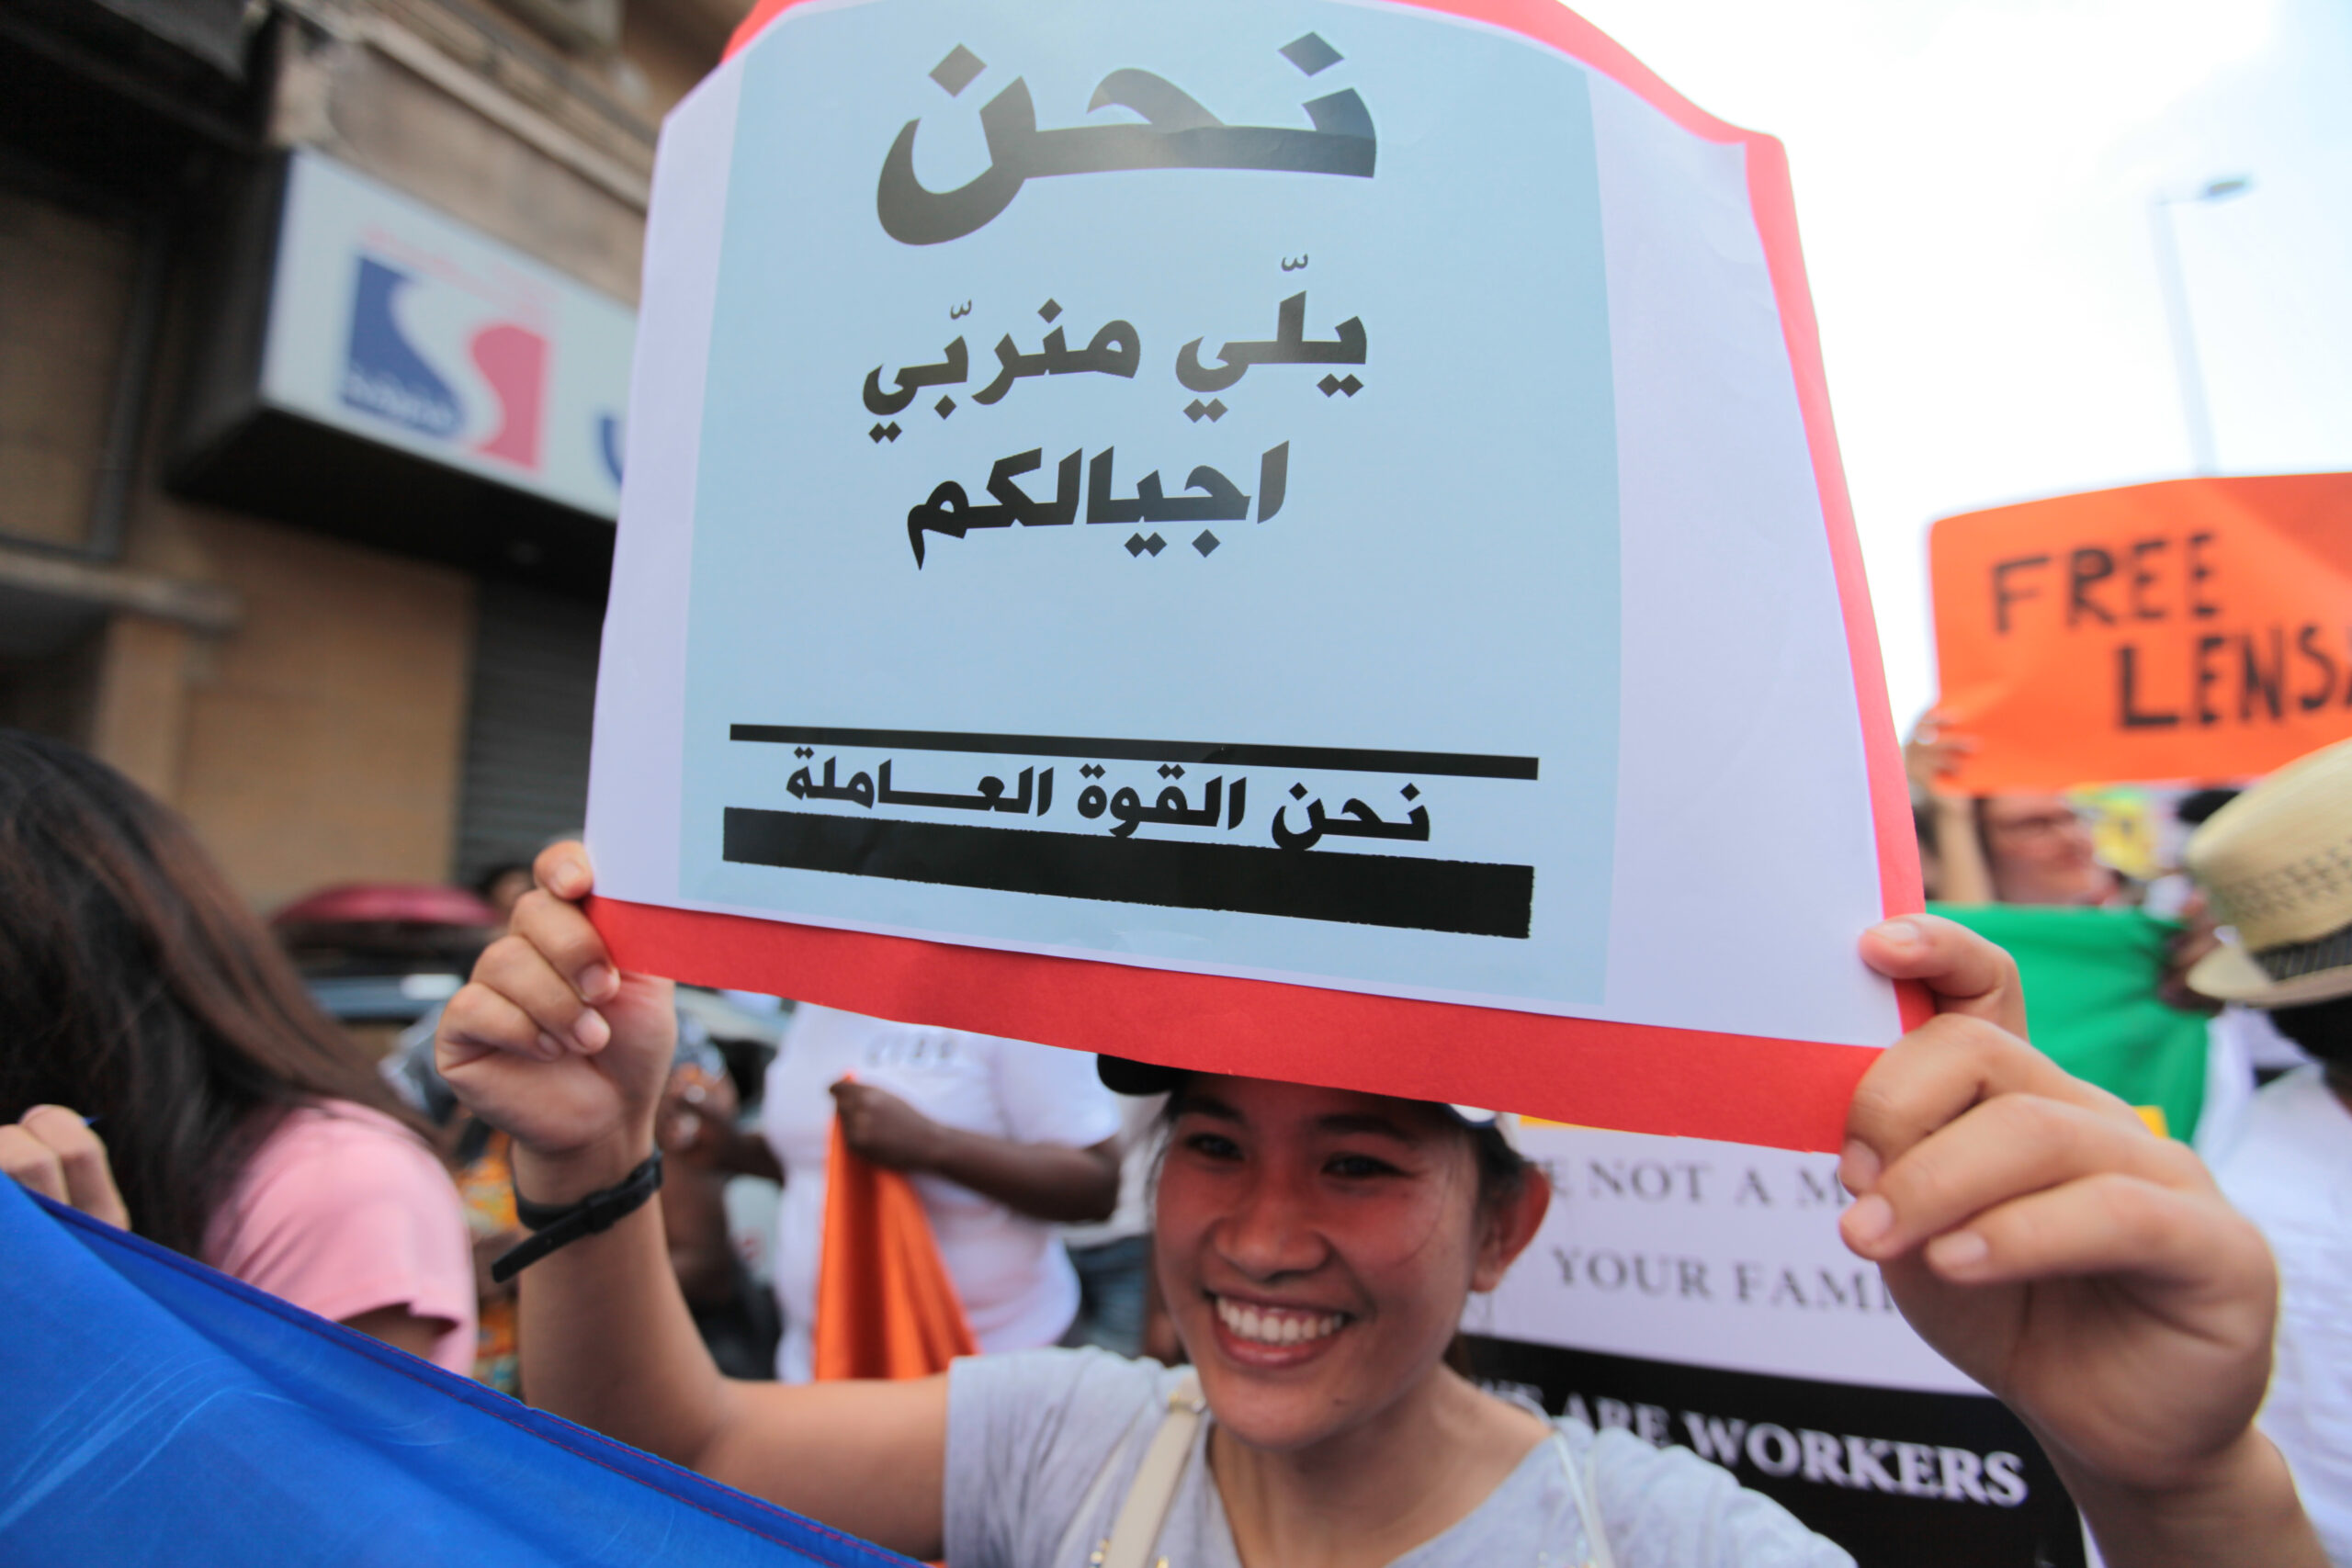 Domestic Worker in Lebanon Fights Racism: Time for Judiciary to Listen